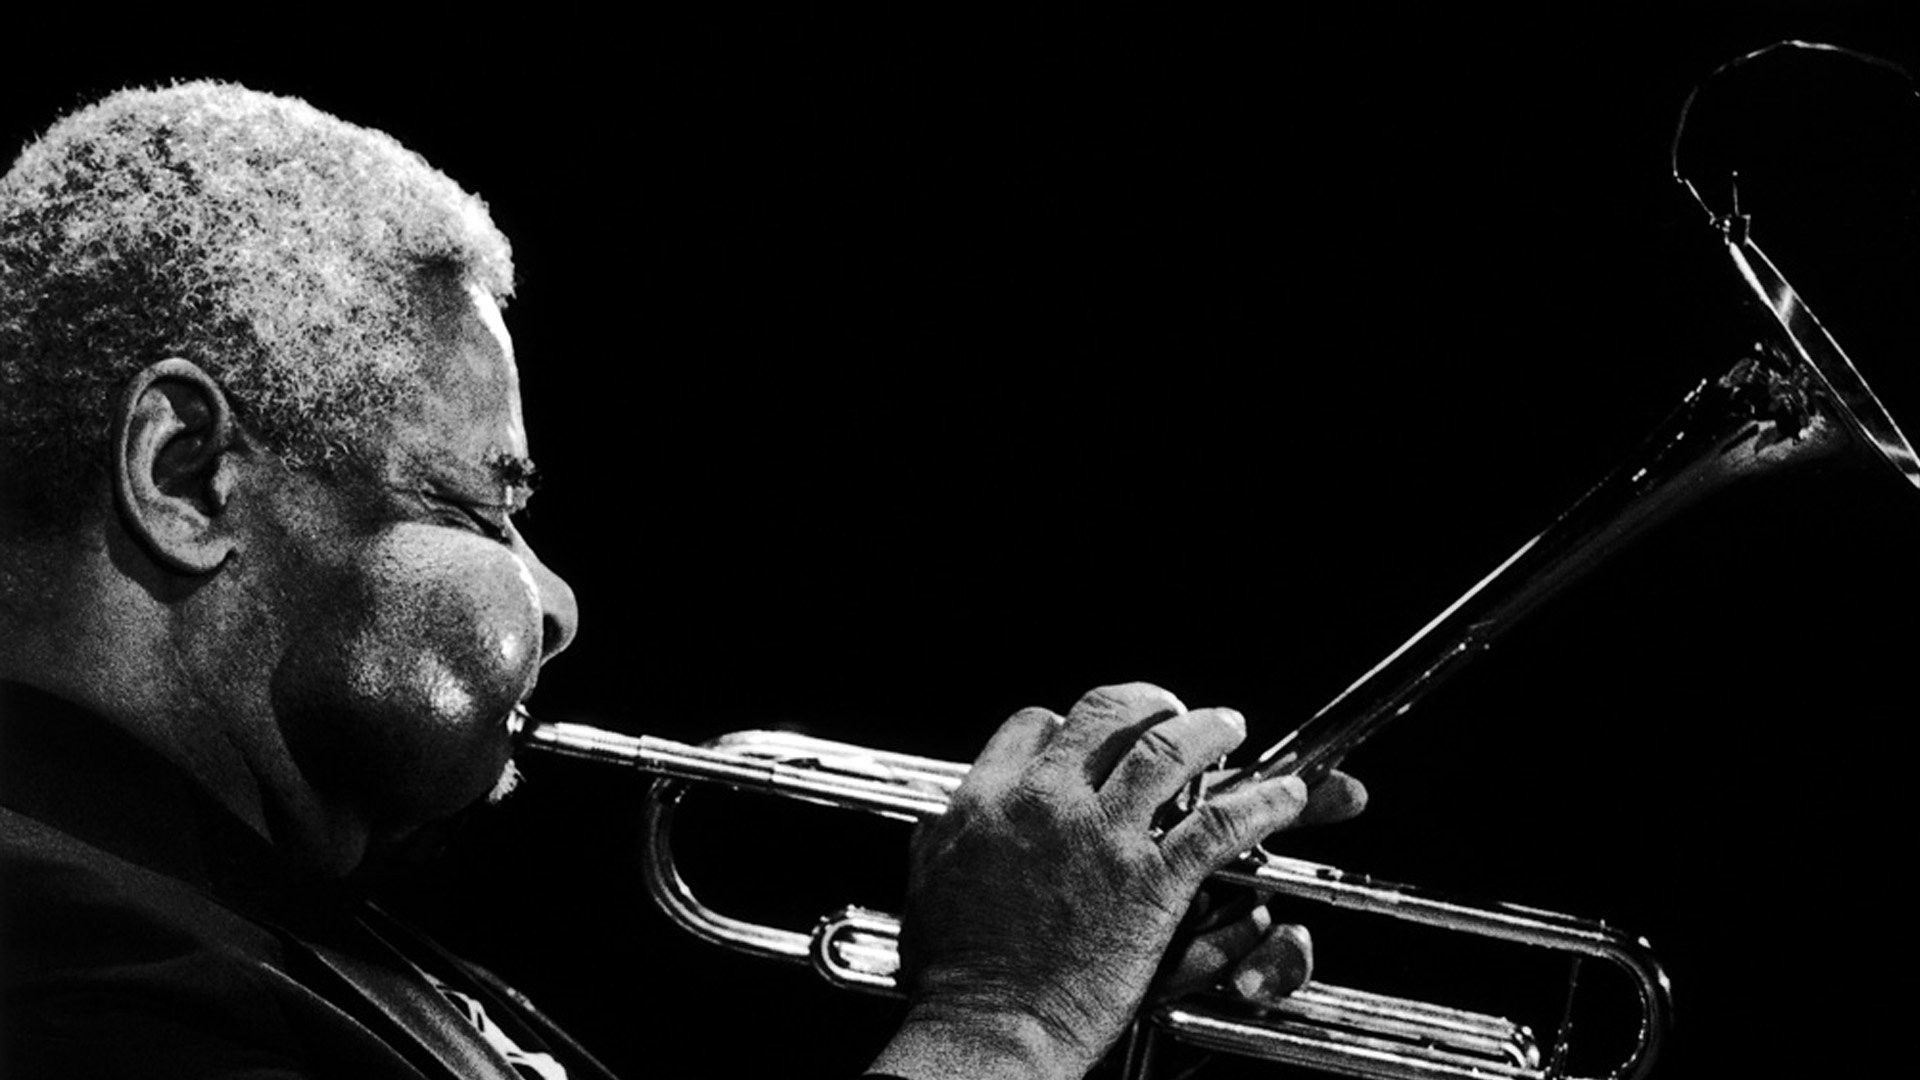 Trumpet: Dizzy Gillespie, An American jazz trumpeter, bandleader, and singer, The virtuoso style. 1920x1080 Full HD Background.